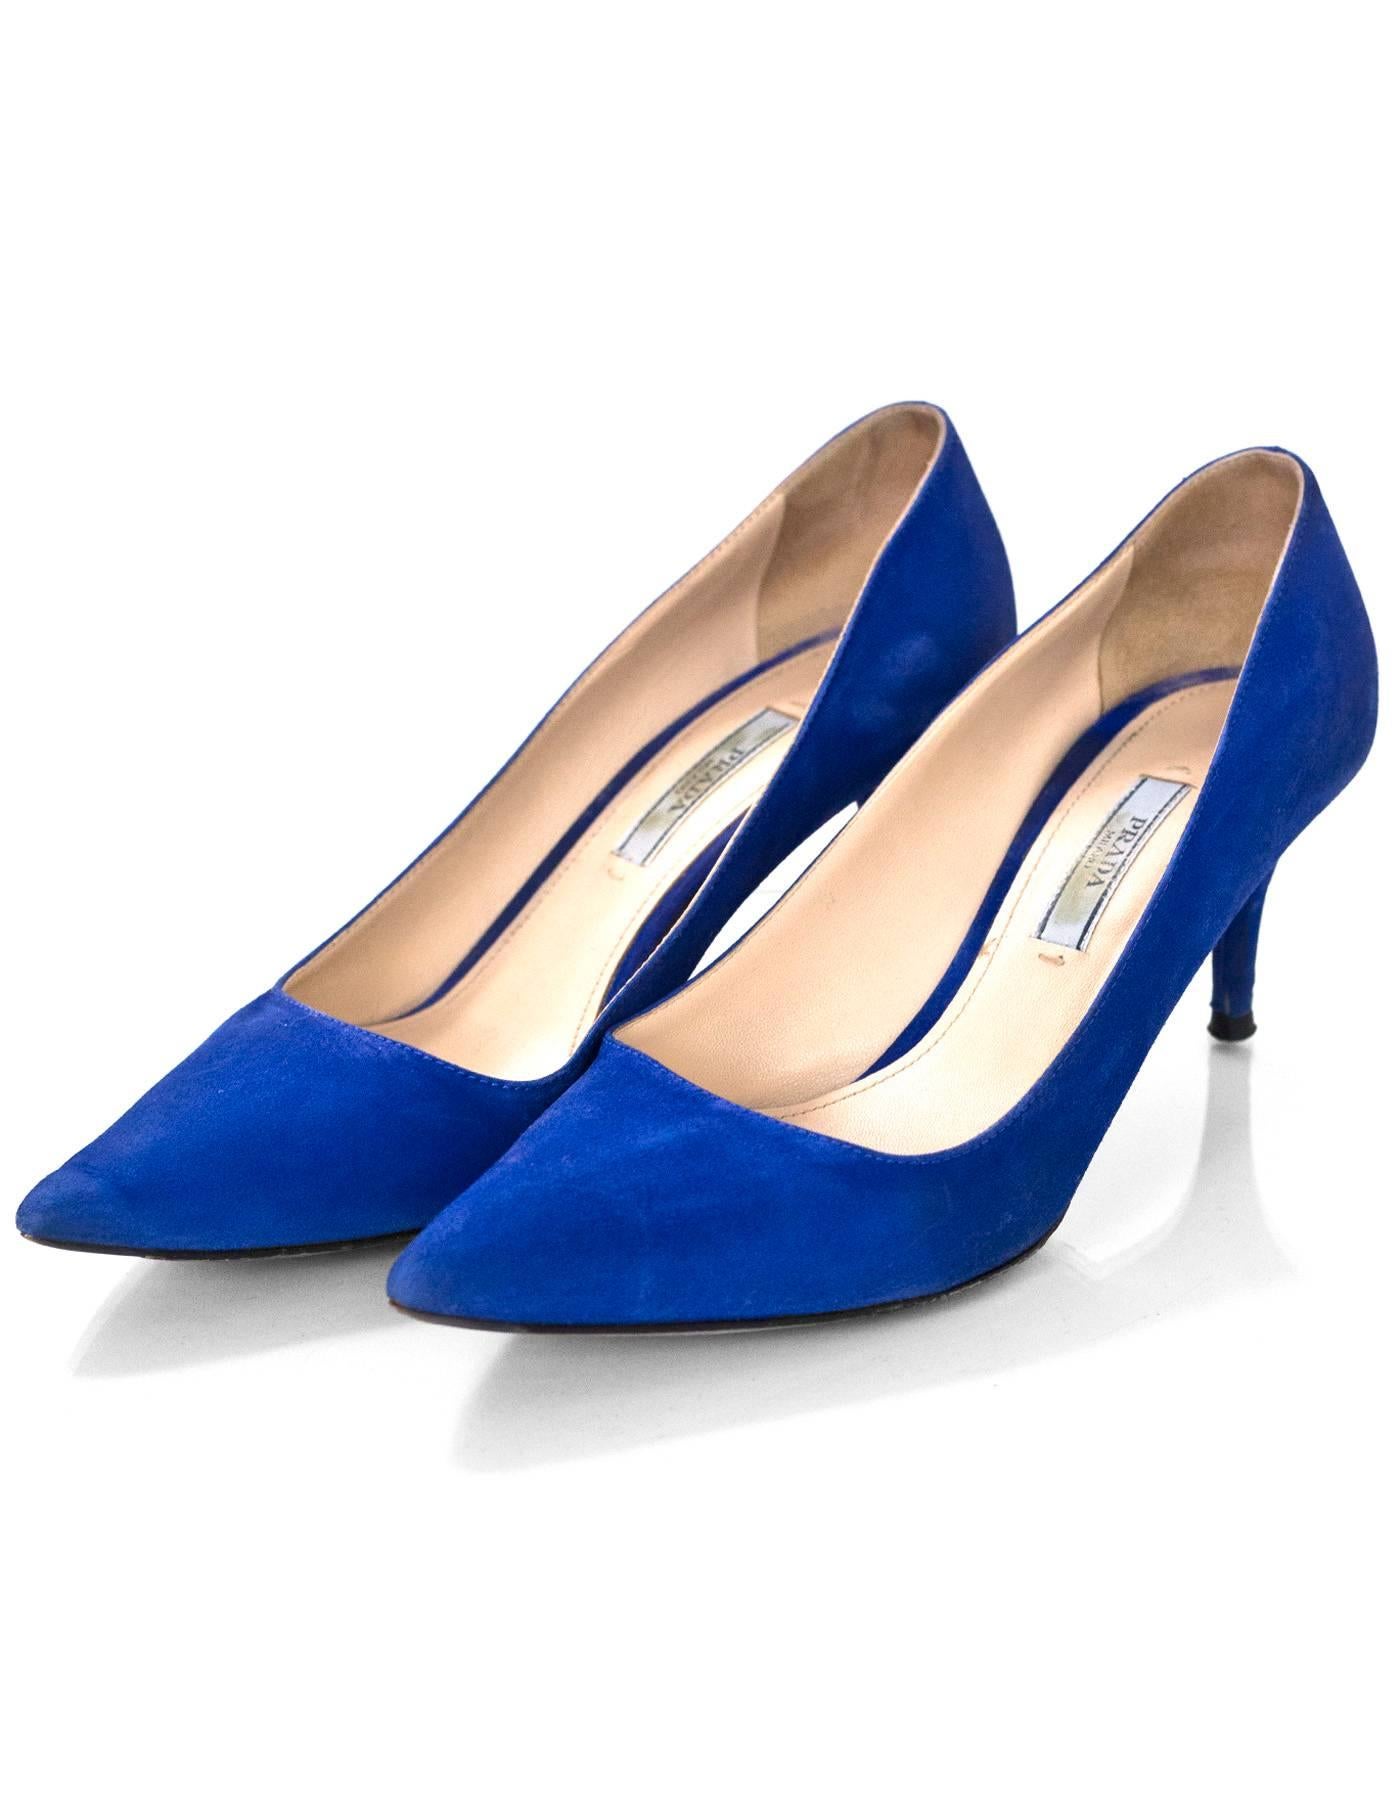 Prada Blue Suede Pumps Sz 37.5

Made In: Italy
Color: Blue
Materials: Suede
Closure/Opening: Slide on
Sole Stamp: Prada 37.5 Made in Italy
Overall Condition: Very good pre-owned condition with the exception of moderate wear at insoles, wear at